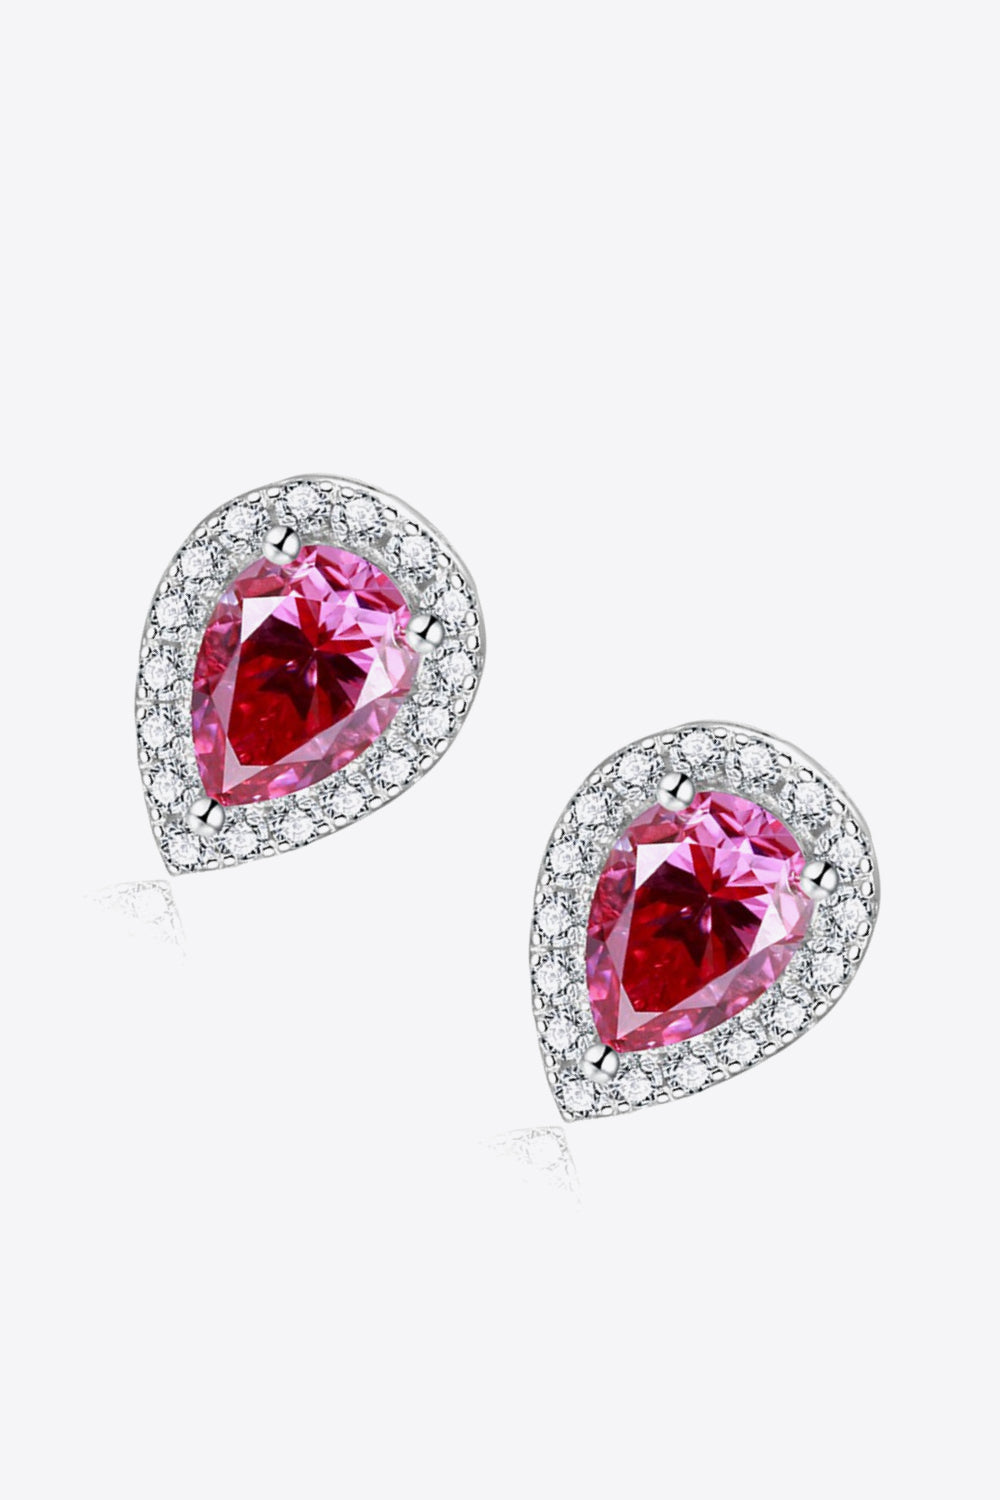 2 Carat Moissanite Teardrop Stud Earrings in Rose-Earrings-Inspired by Justeen-Women's Clothing Boutique in Chicago, Illinois